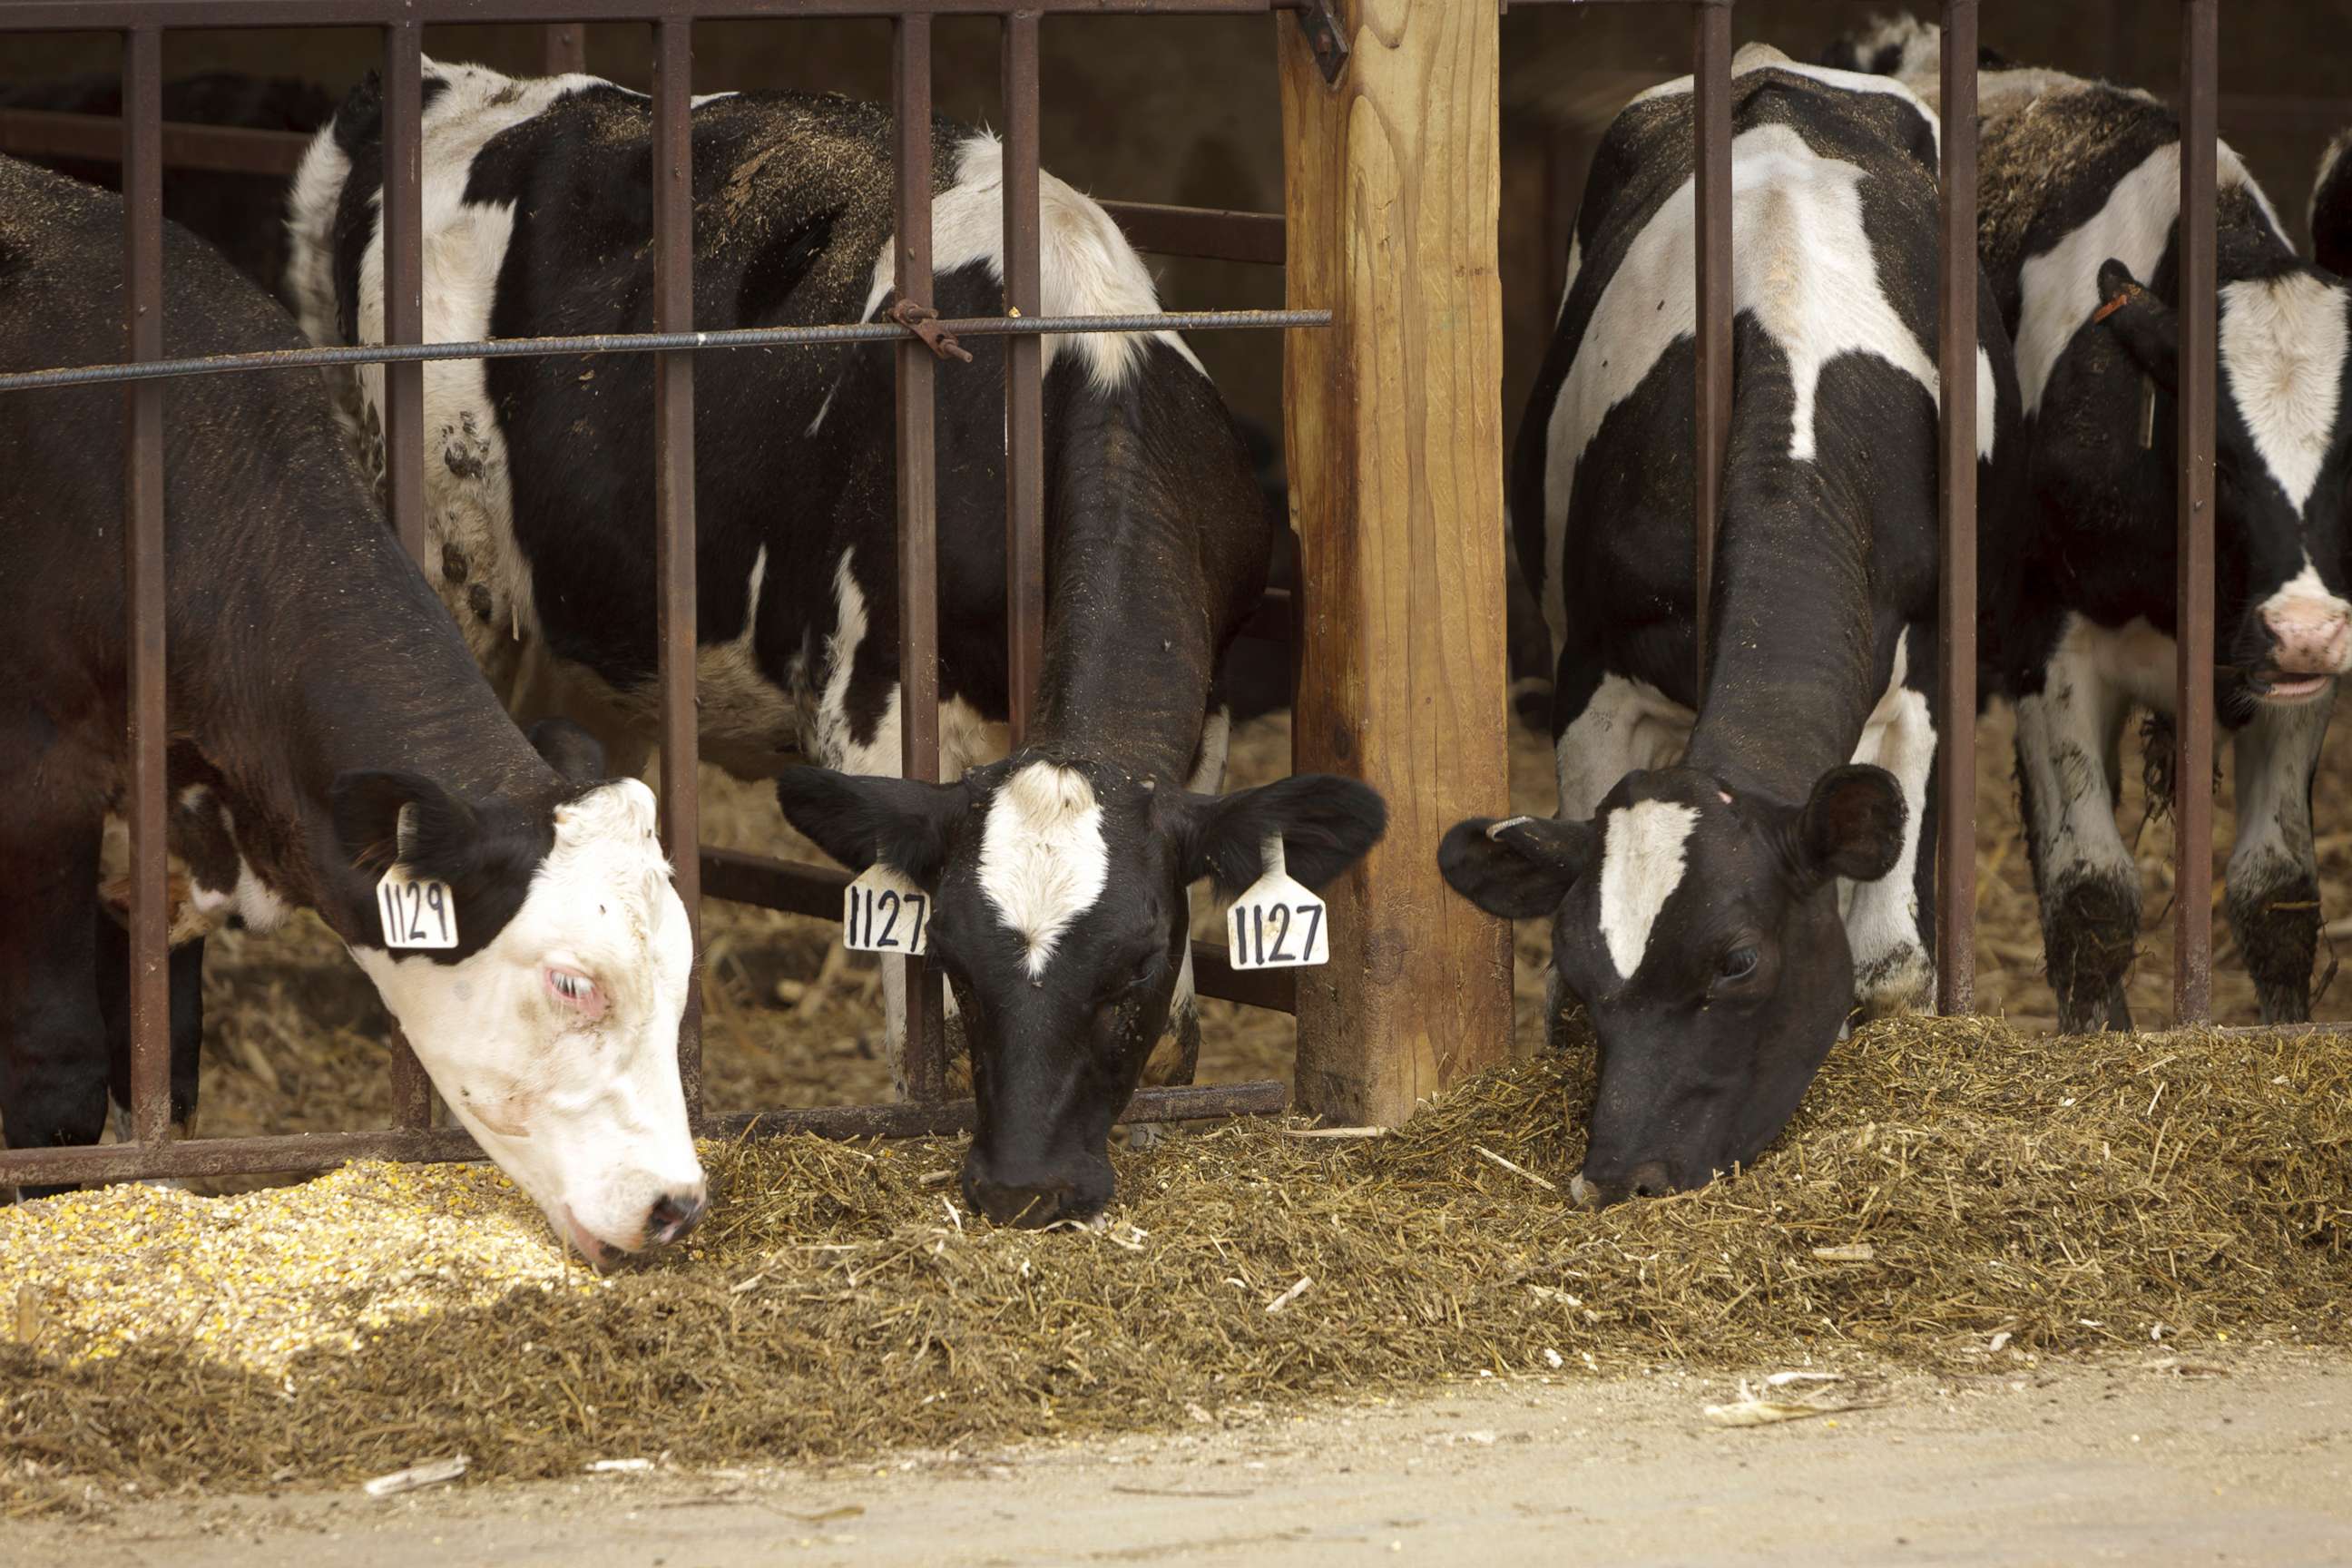 PHOTO: Cows are seen here in this Aug. 16, 2011 file photo.